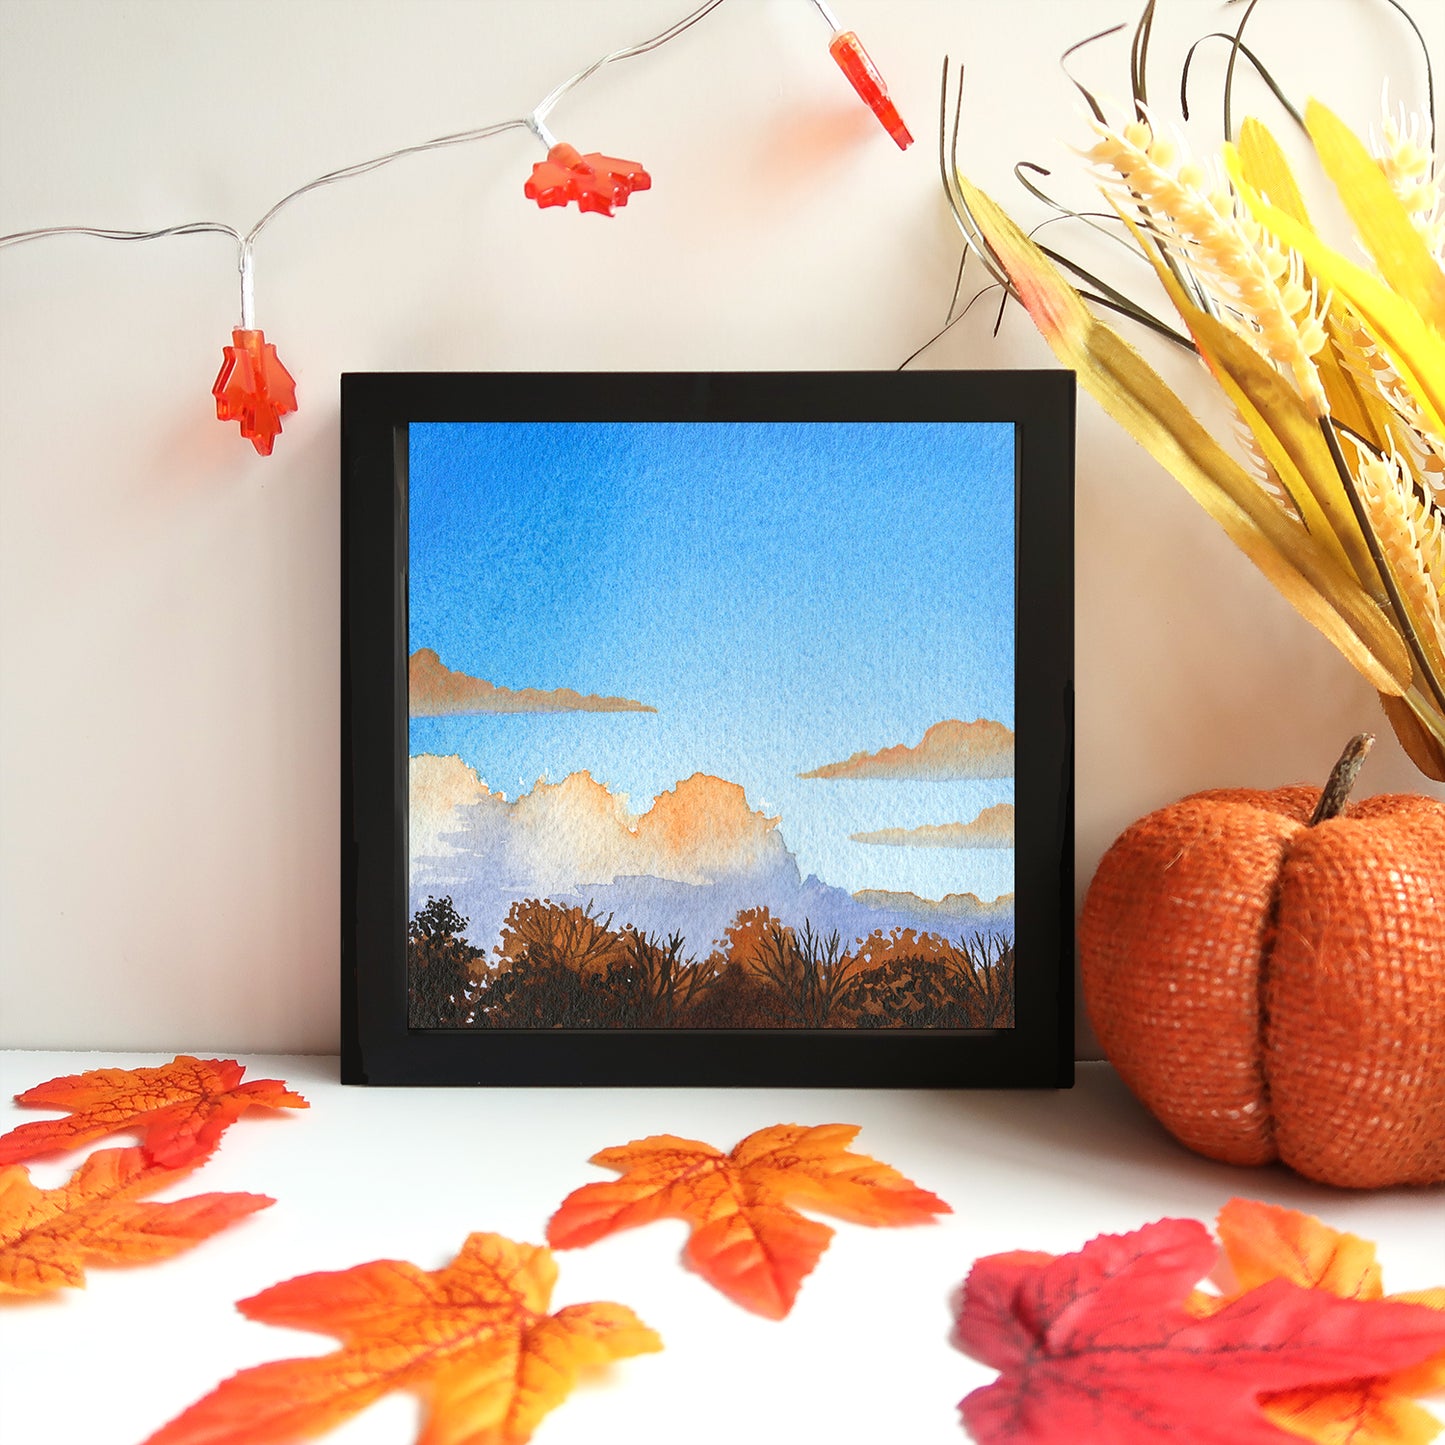 Fall Sunset with Clouds - Watercolor Sky Art Print